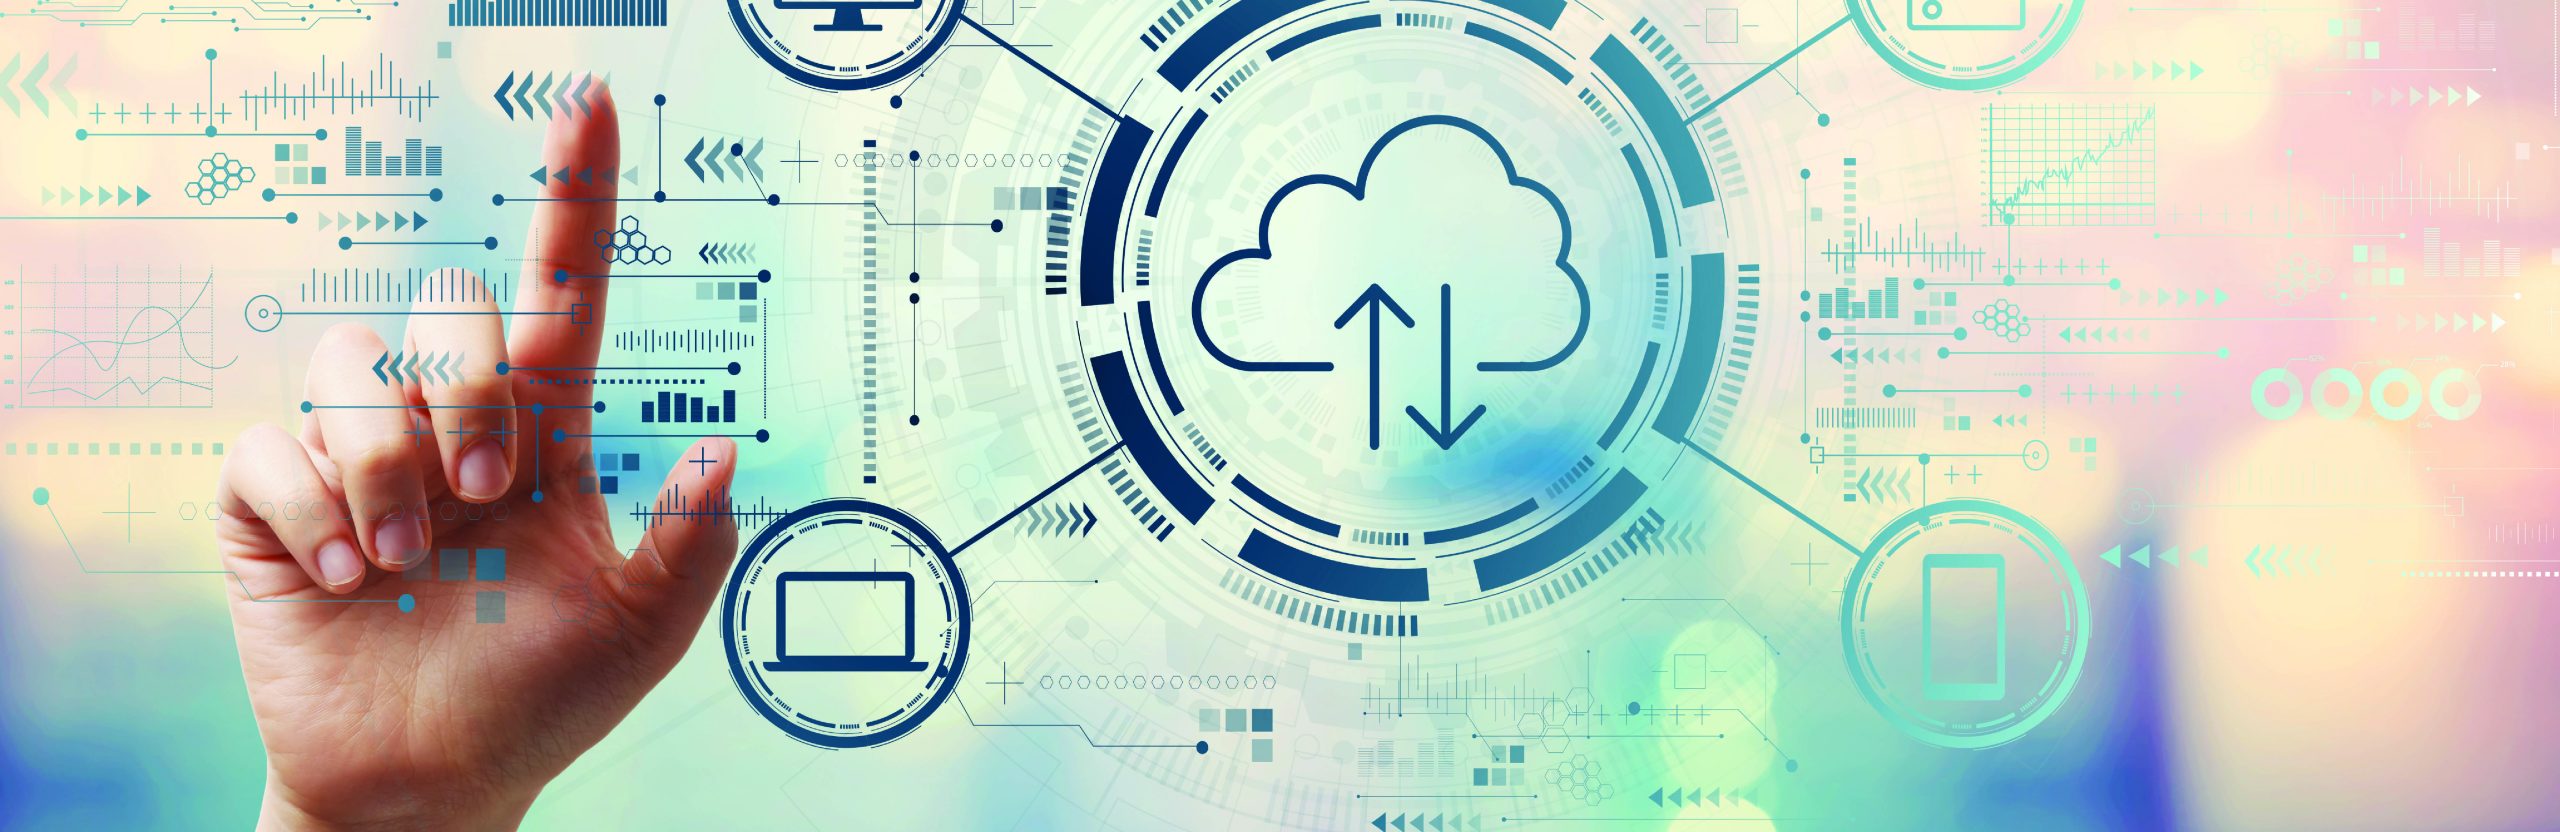 CBTS: Stepping into the Future with Cloud-Based Communication Solutions